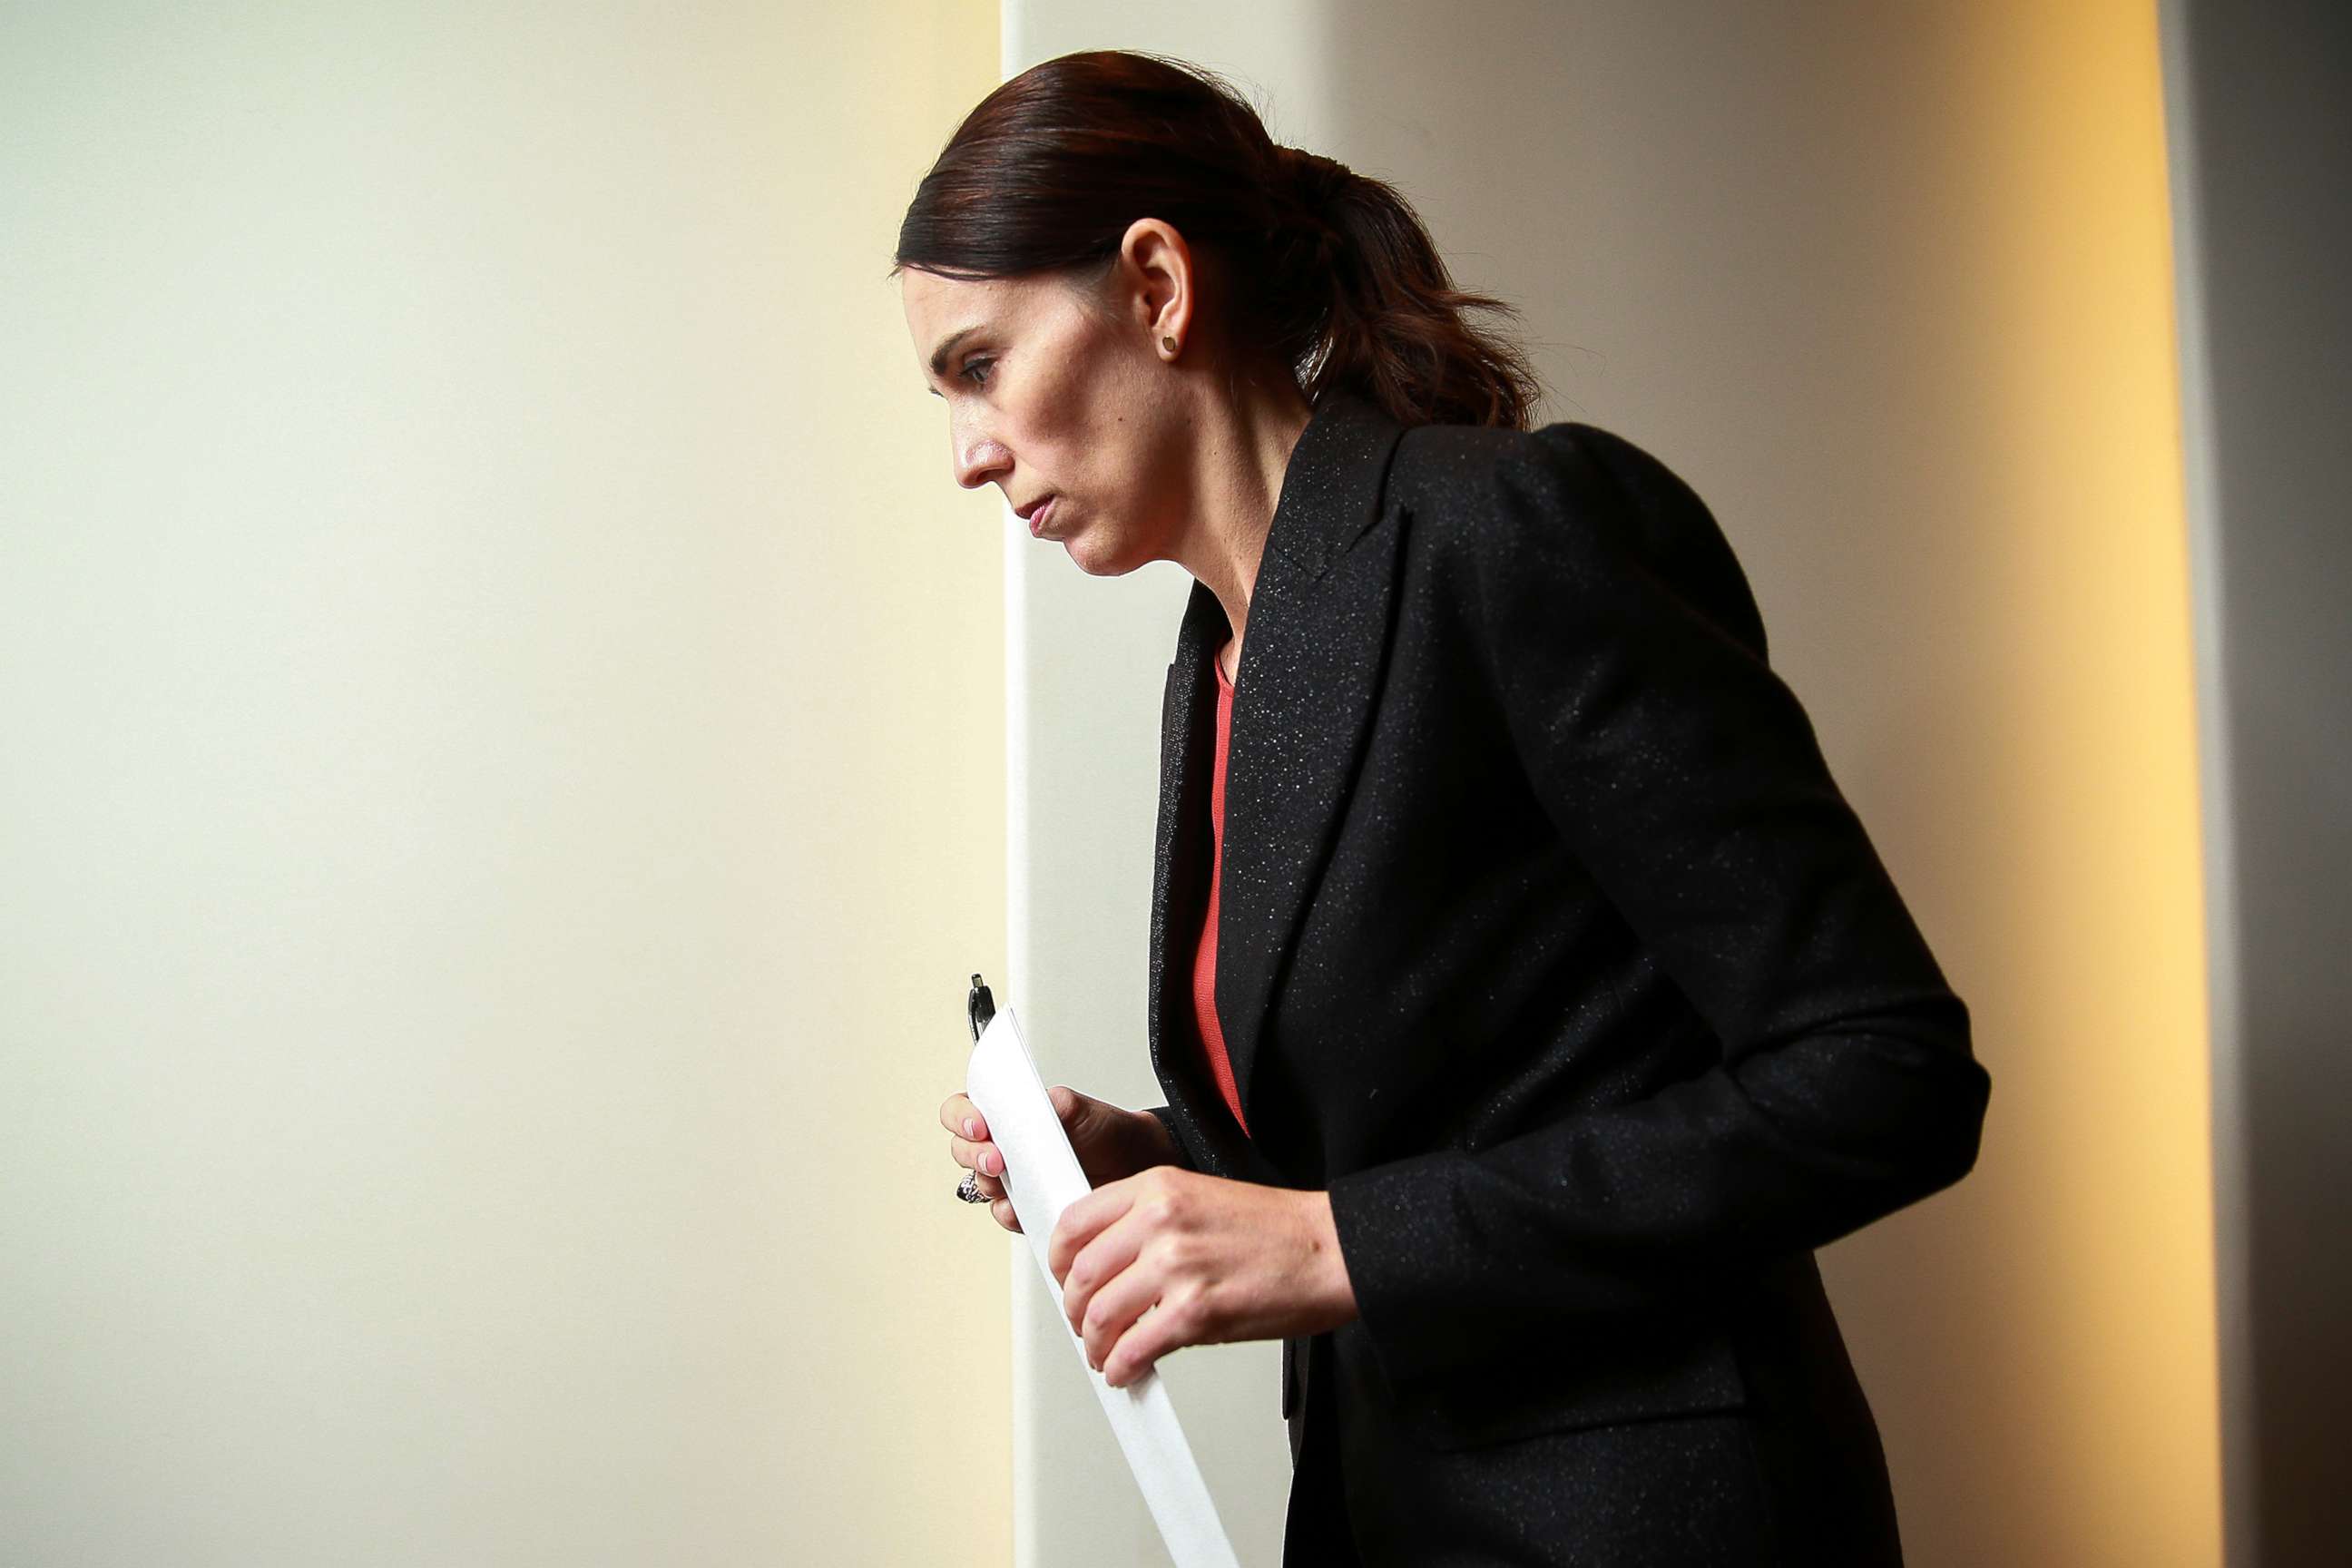 PHOTO: Prime Minister Jacinda Ardern exits after a press conference at Parliament, March 15, 2019, in Wellington, New Zealand.